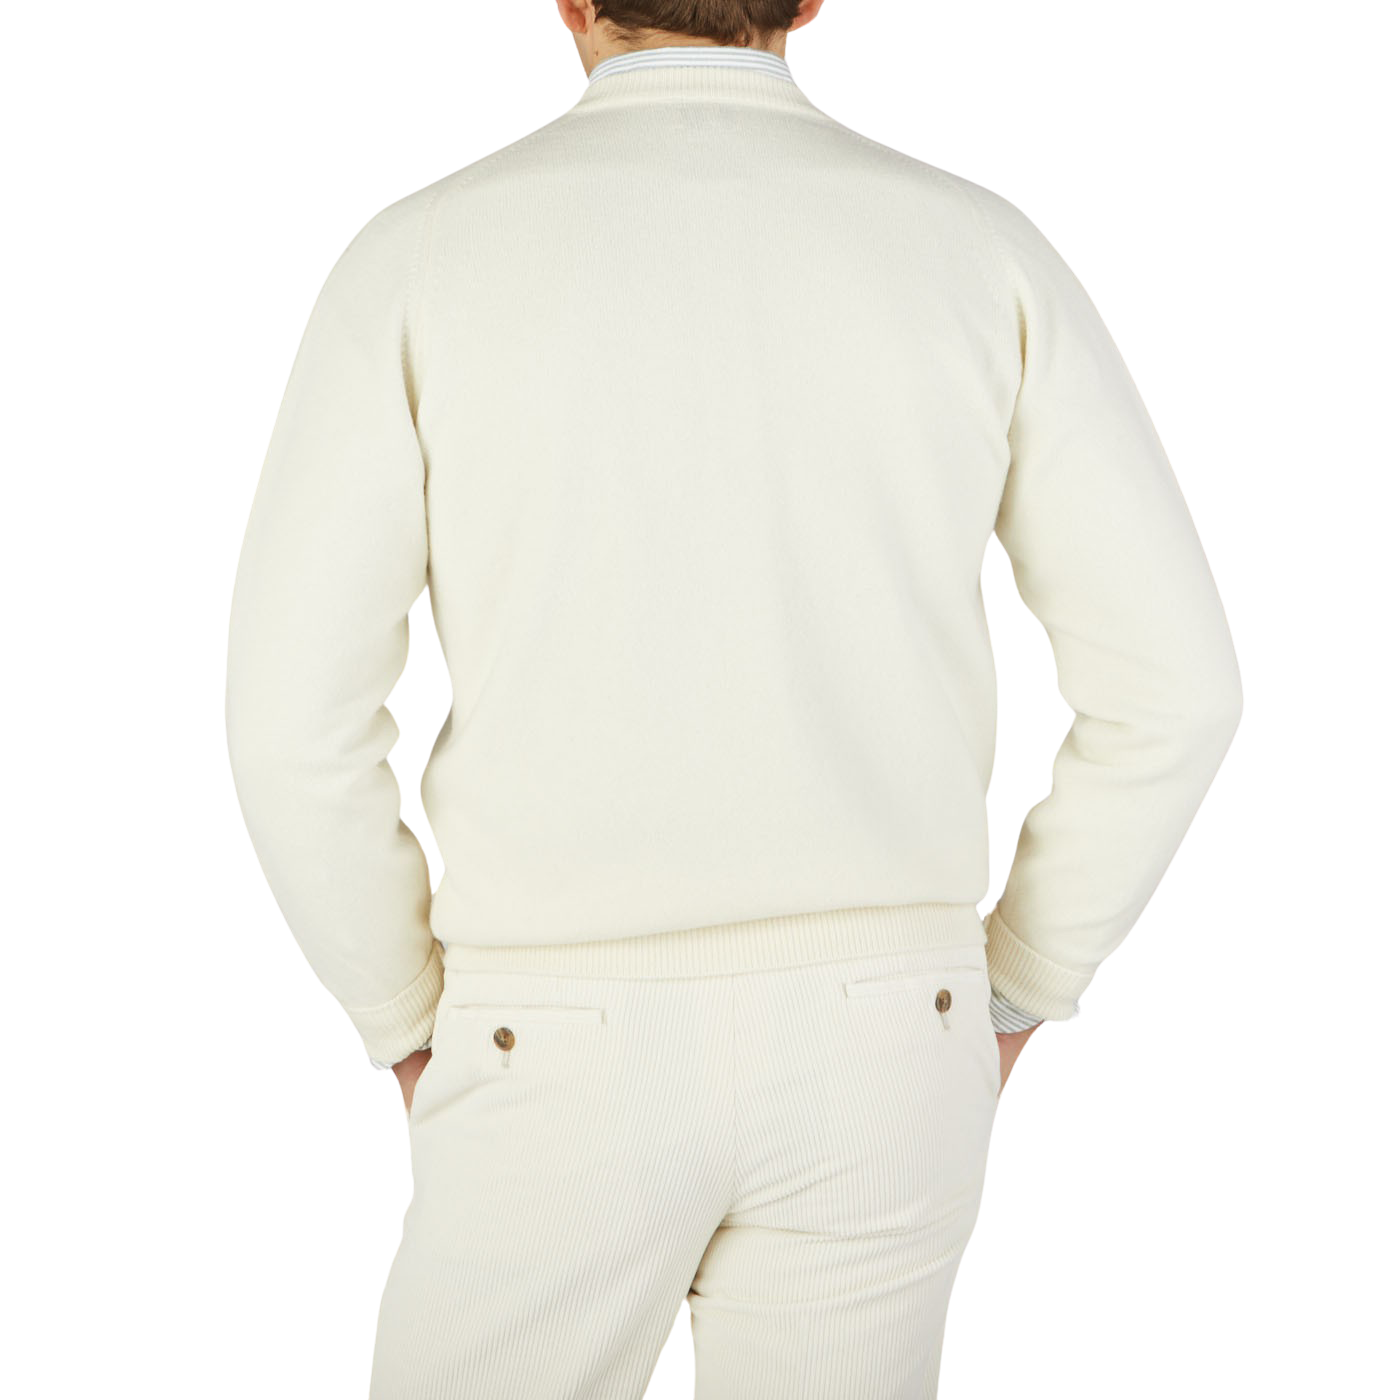 The back view of a man wearing a William Lockie Off-White Deep V-Neck Lambswool Sweater.